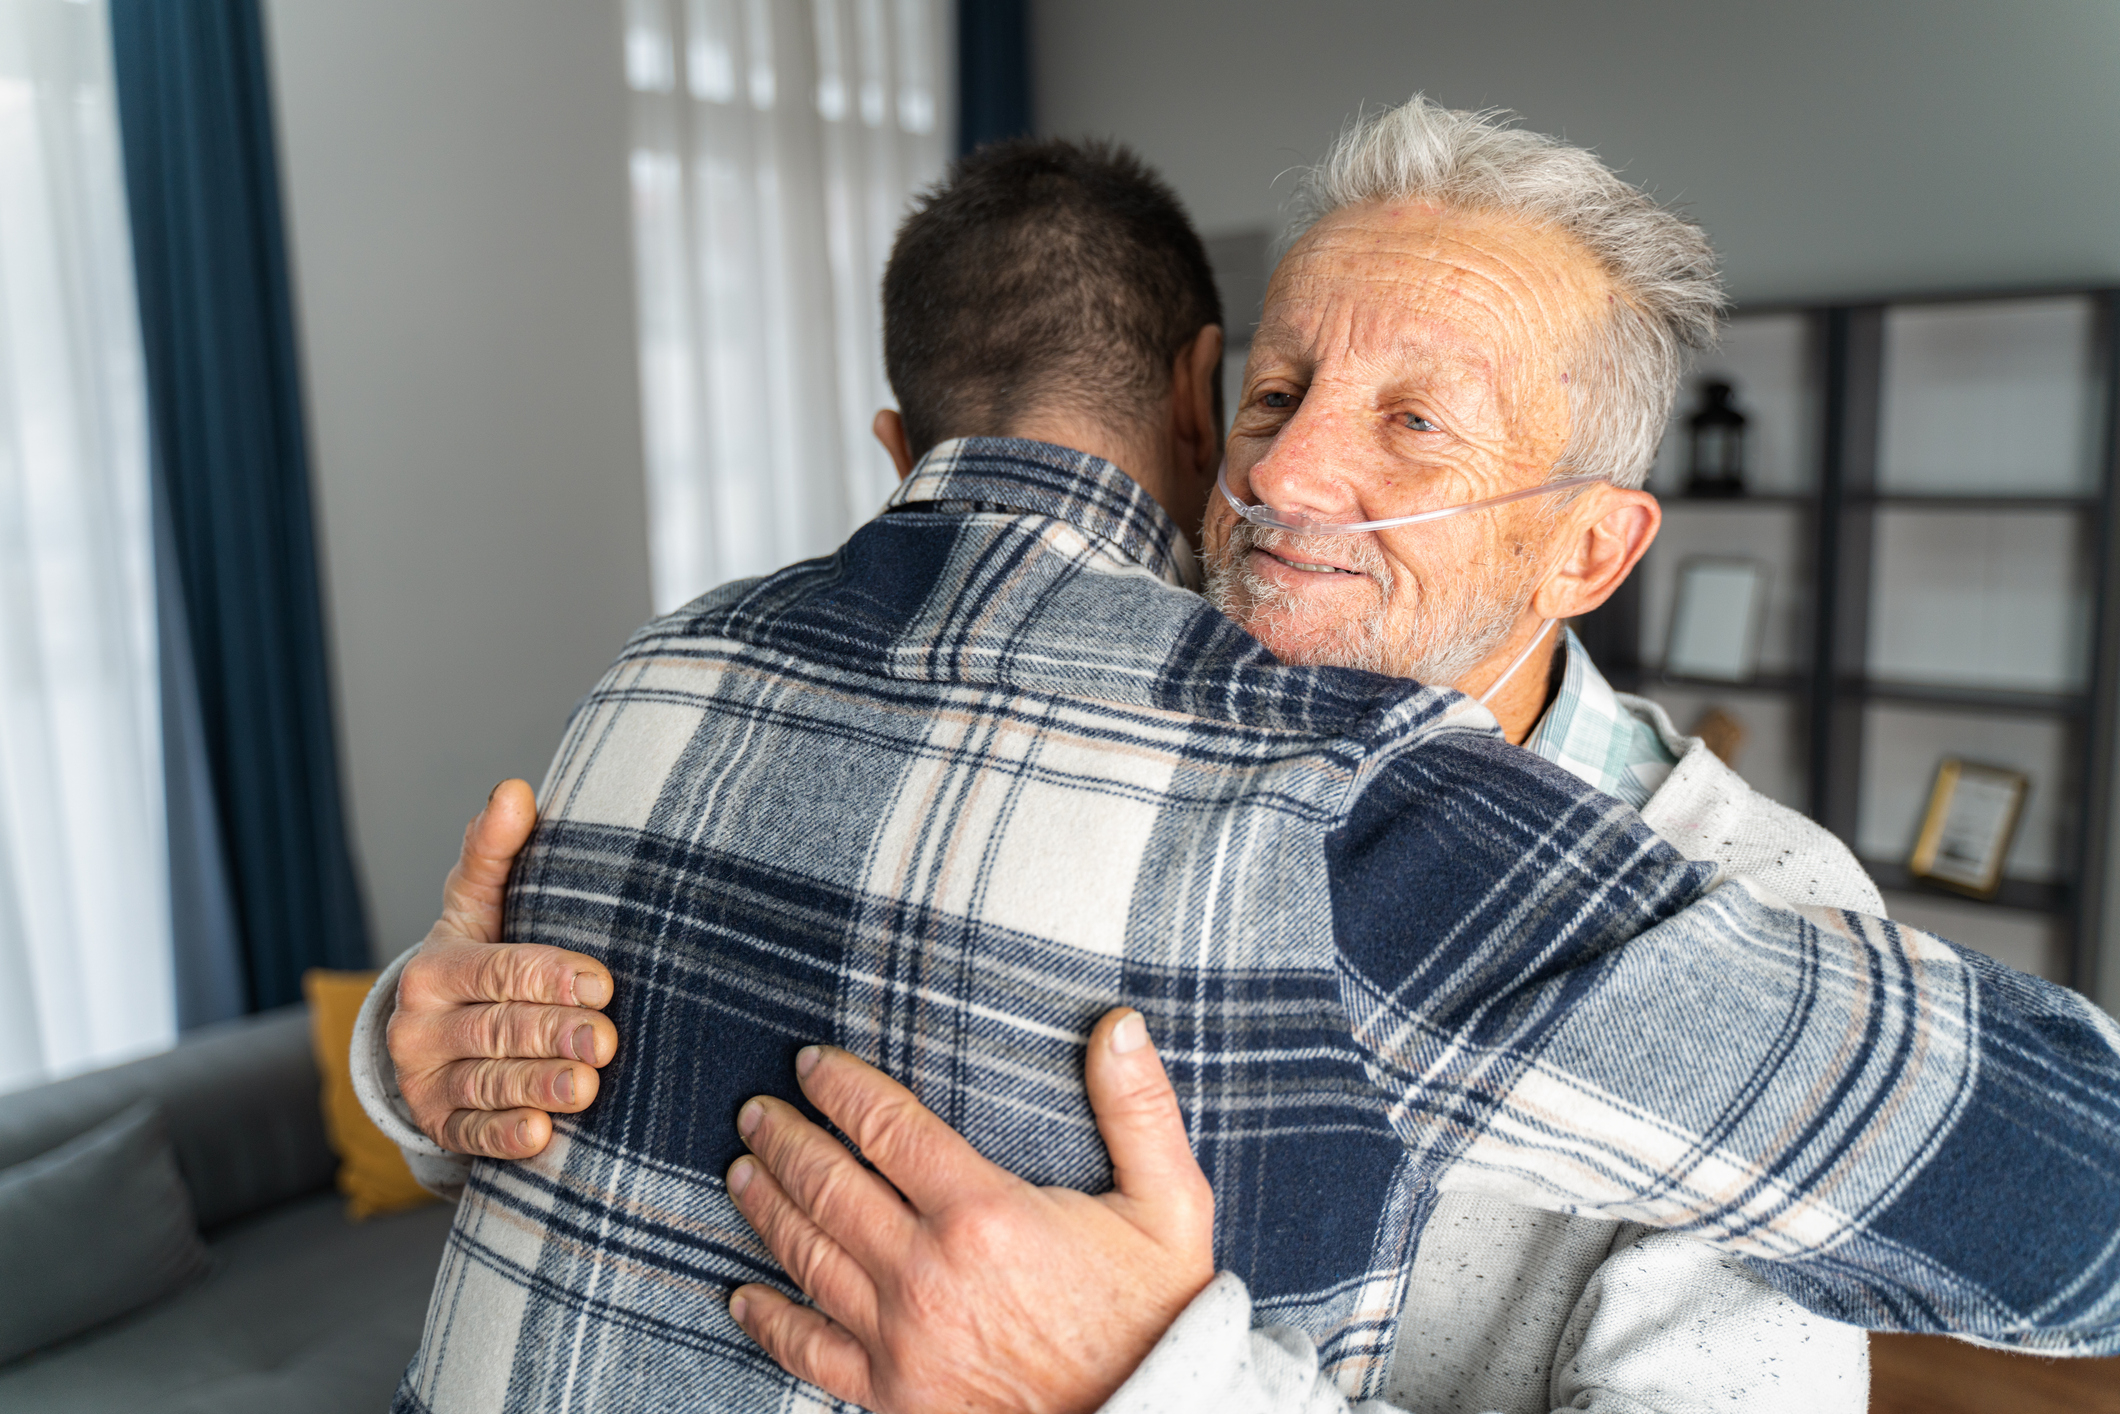 older man hugging someone as they wear tubes to help them breathe